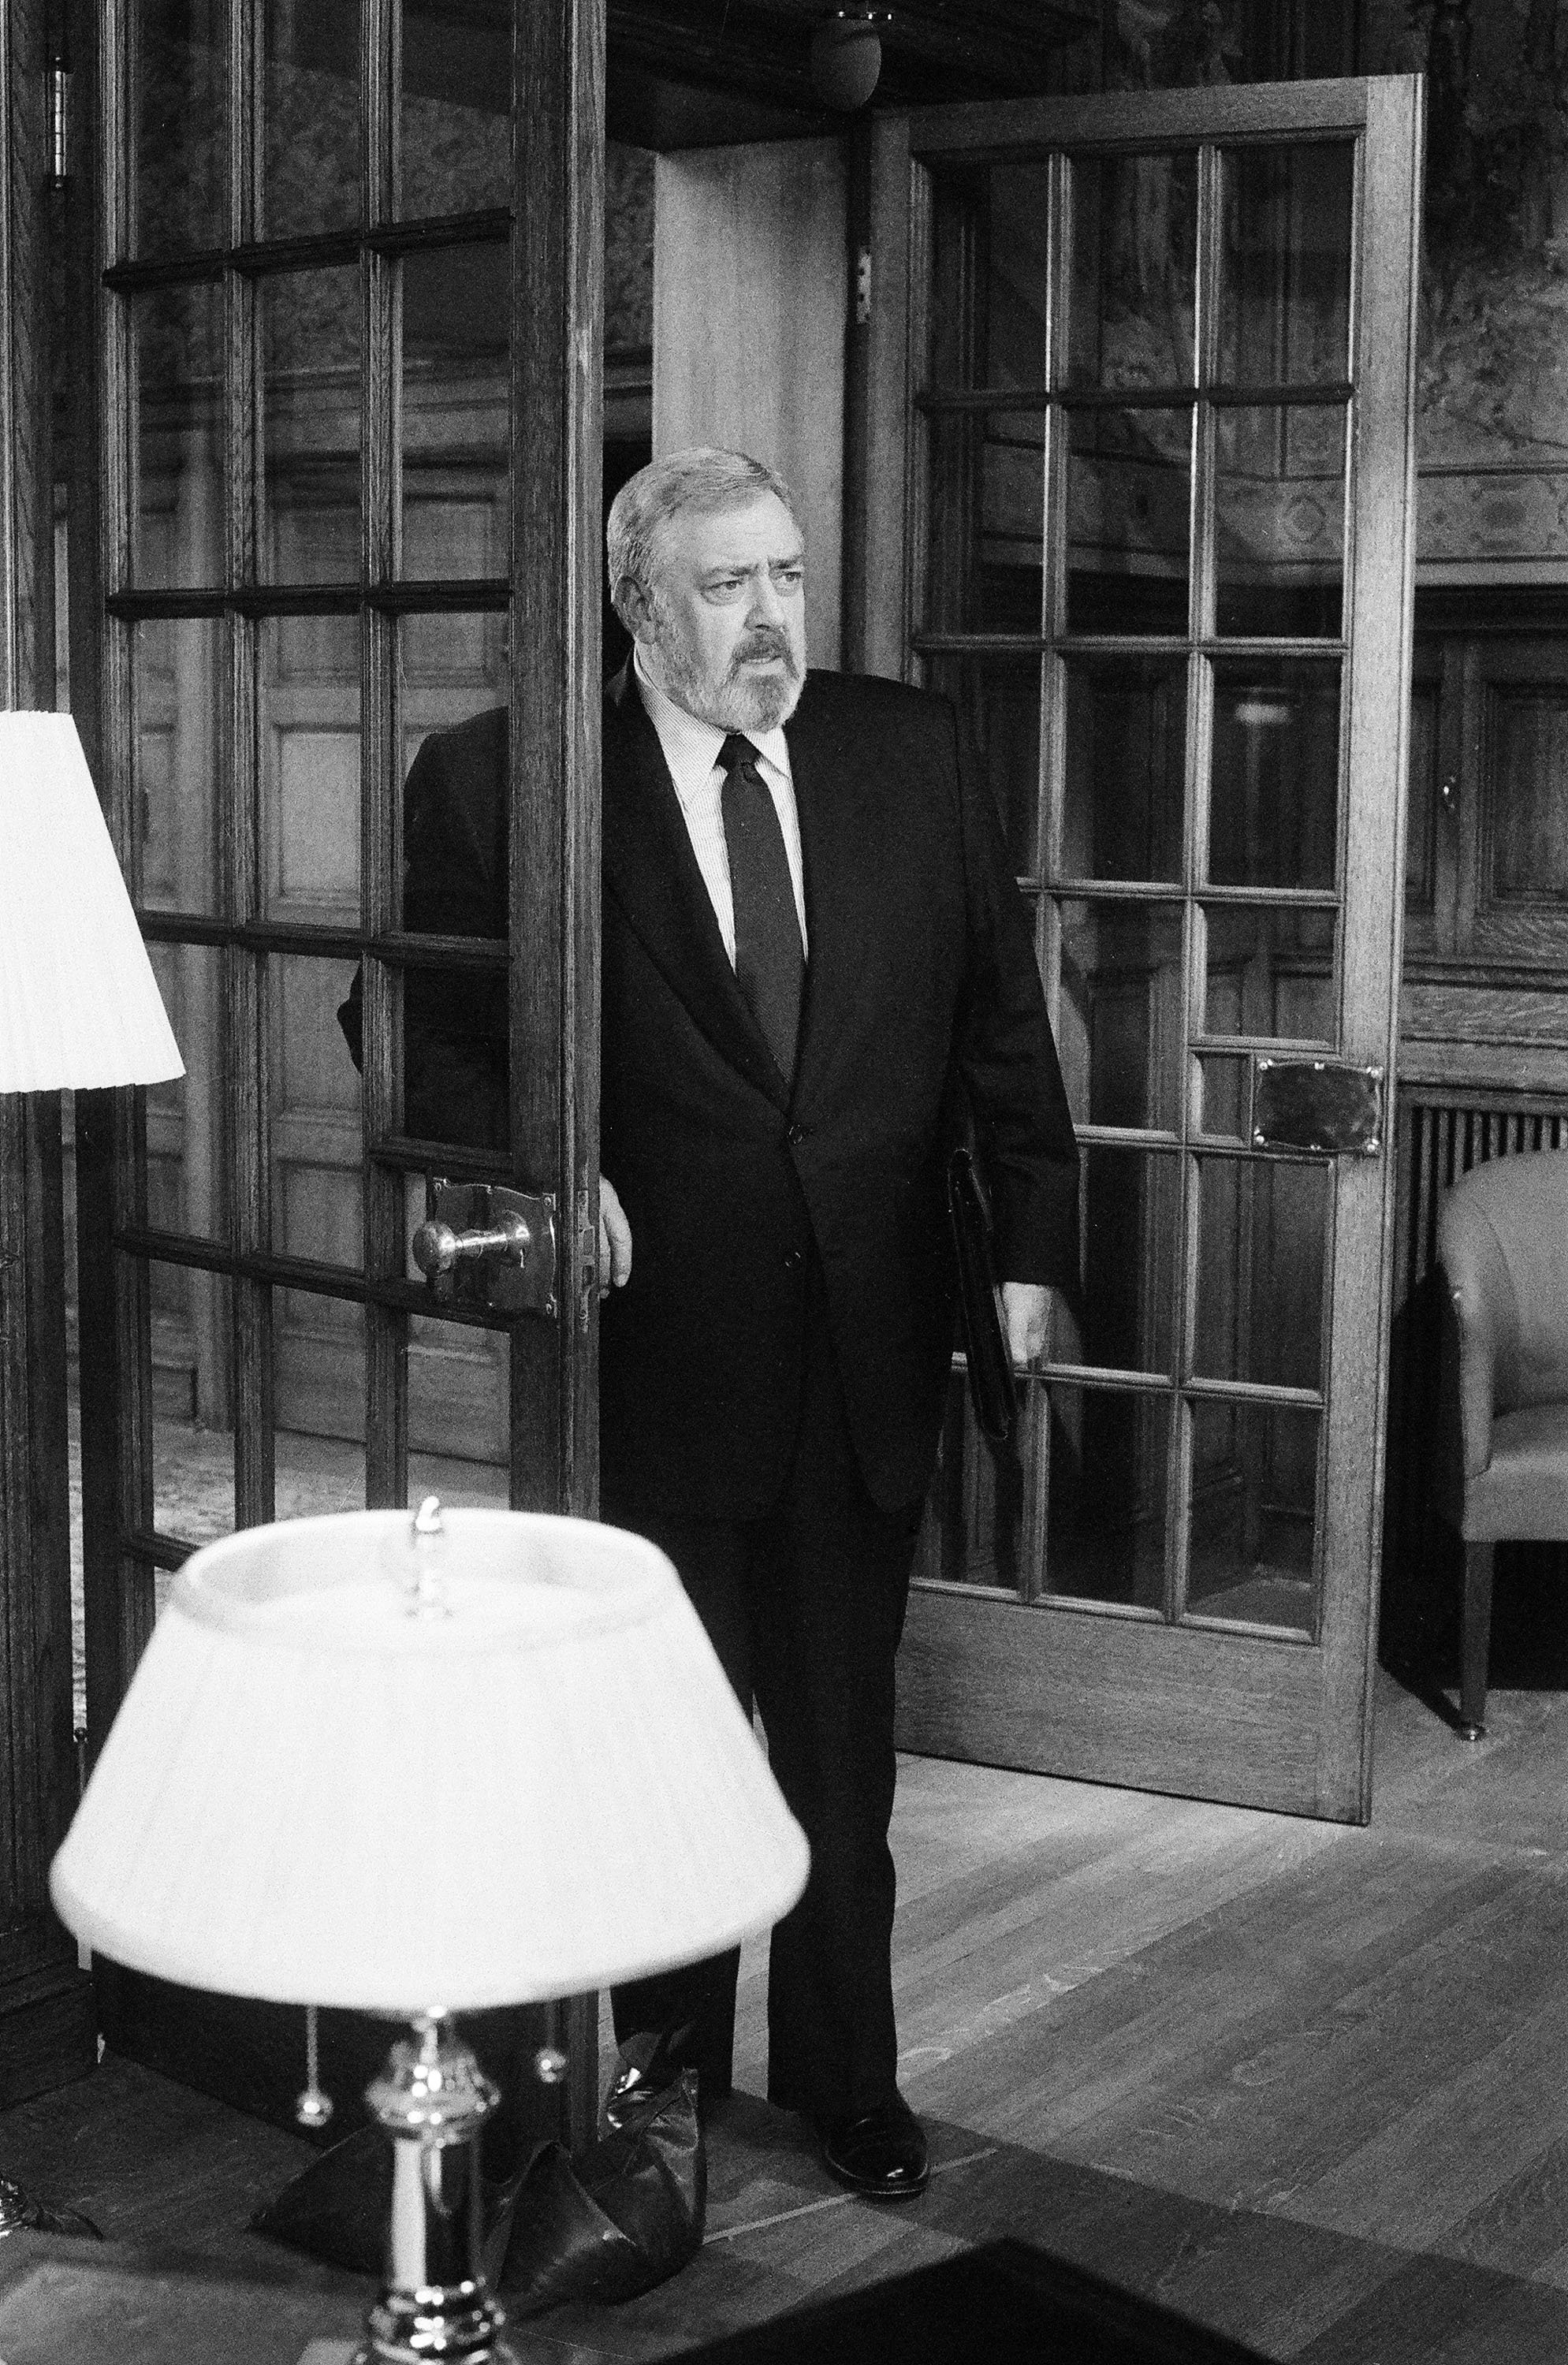 Raymond Burr standing at the door as Perry Mason in the spin-off series "Perry Mason Returns"